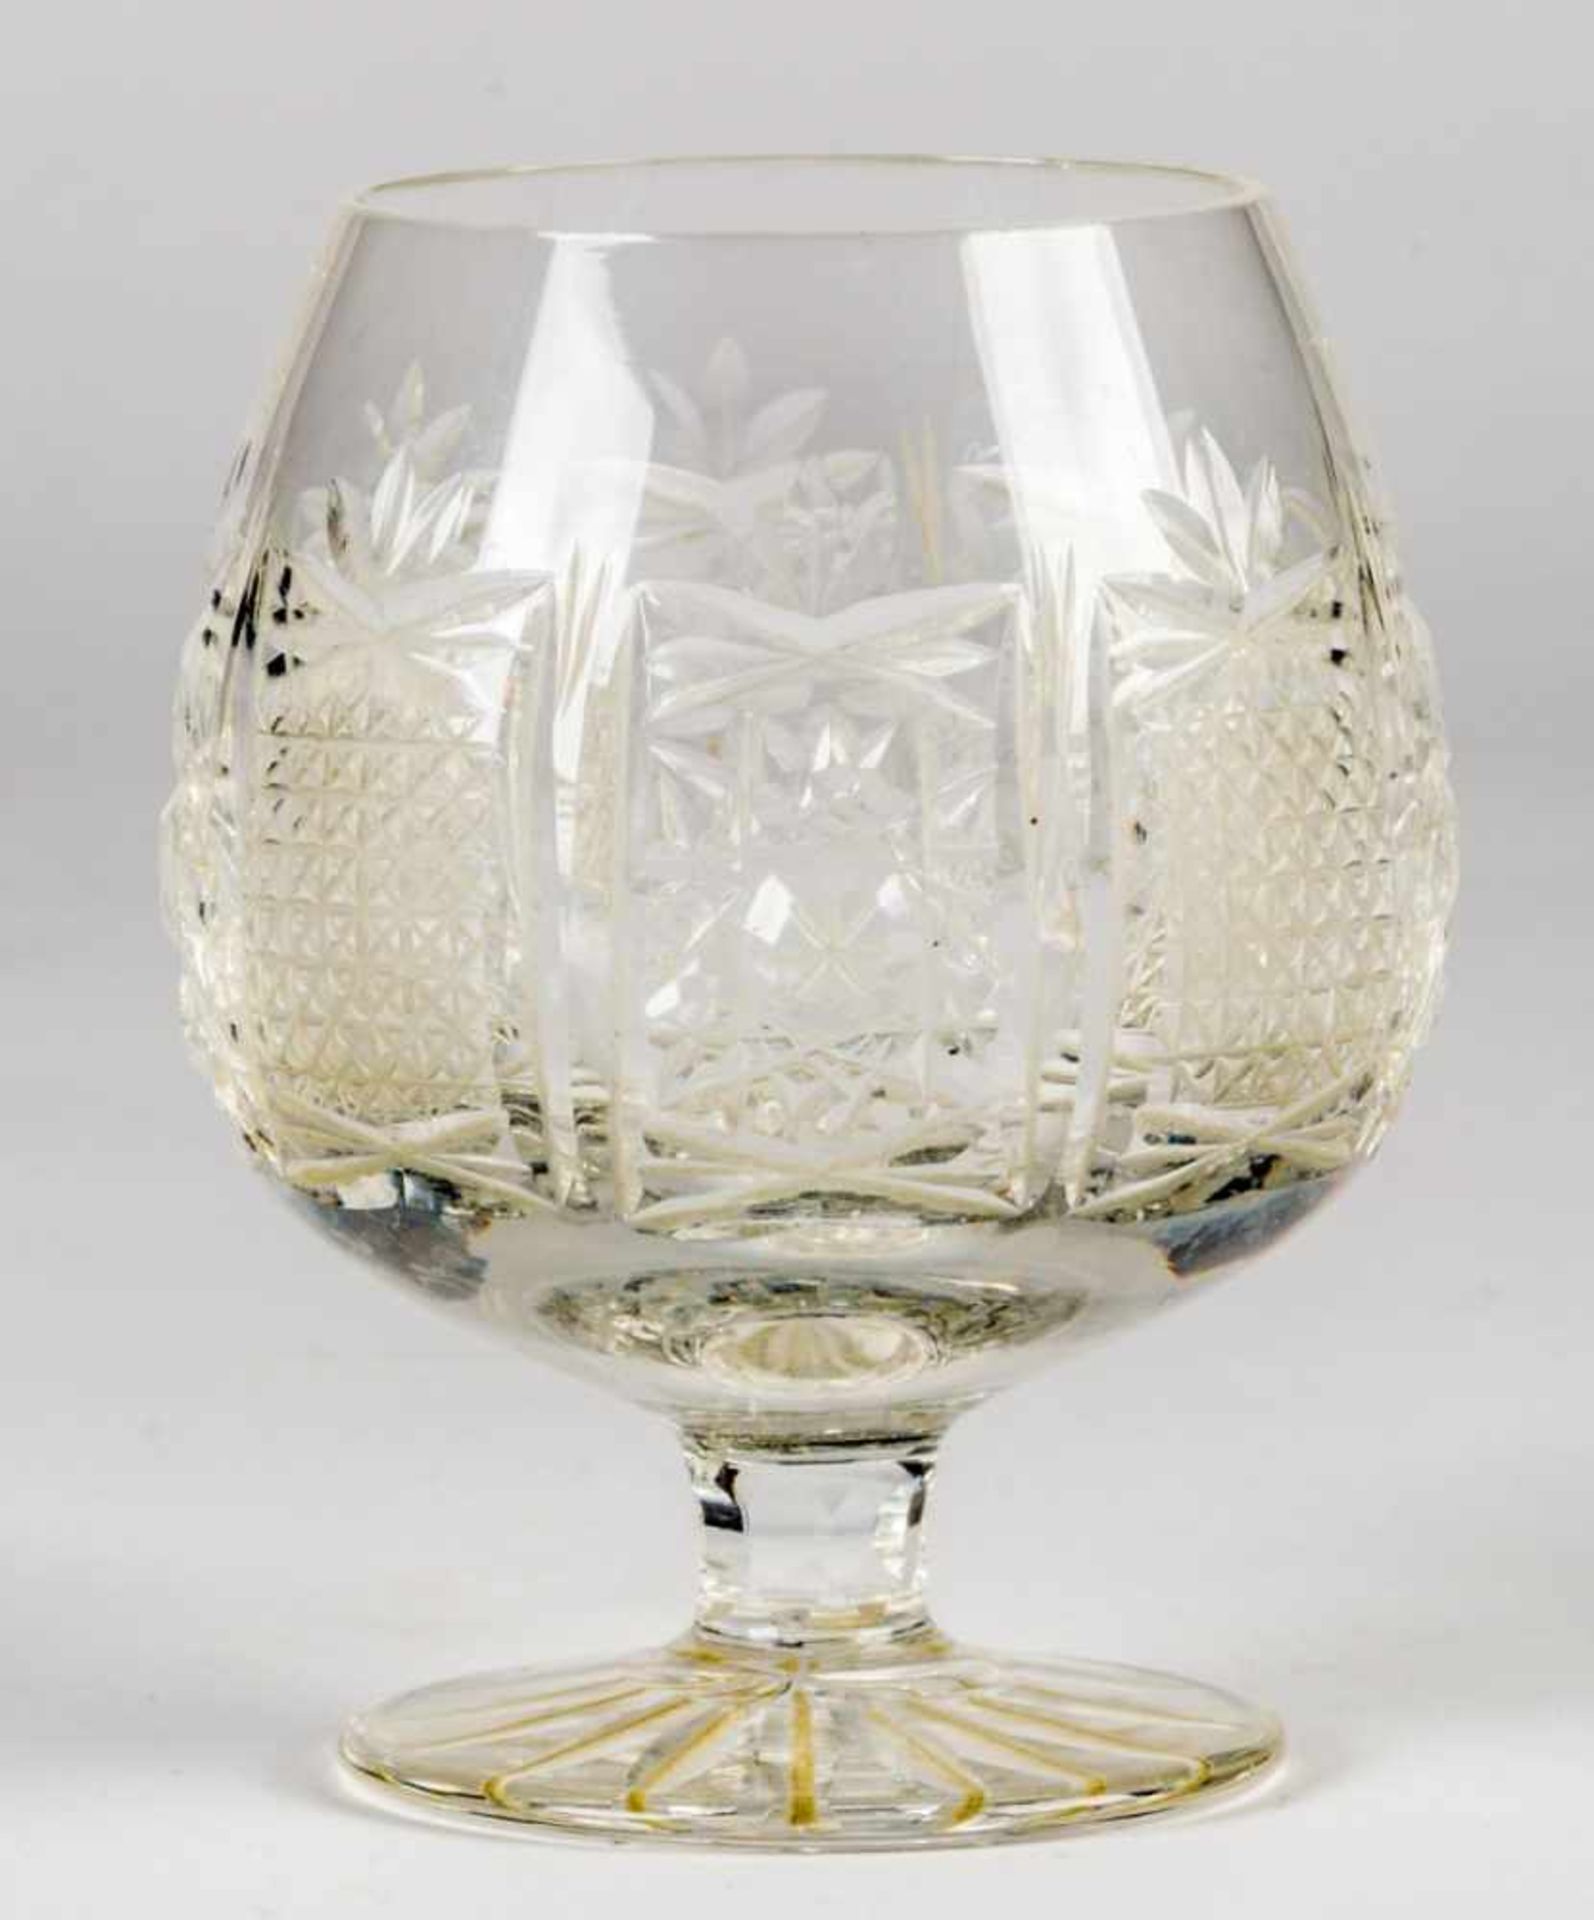 Set of 6 whiskey / cognac glasses, Bohemian, probably Moser Karlsbad, colorless crystalglass with